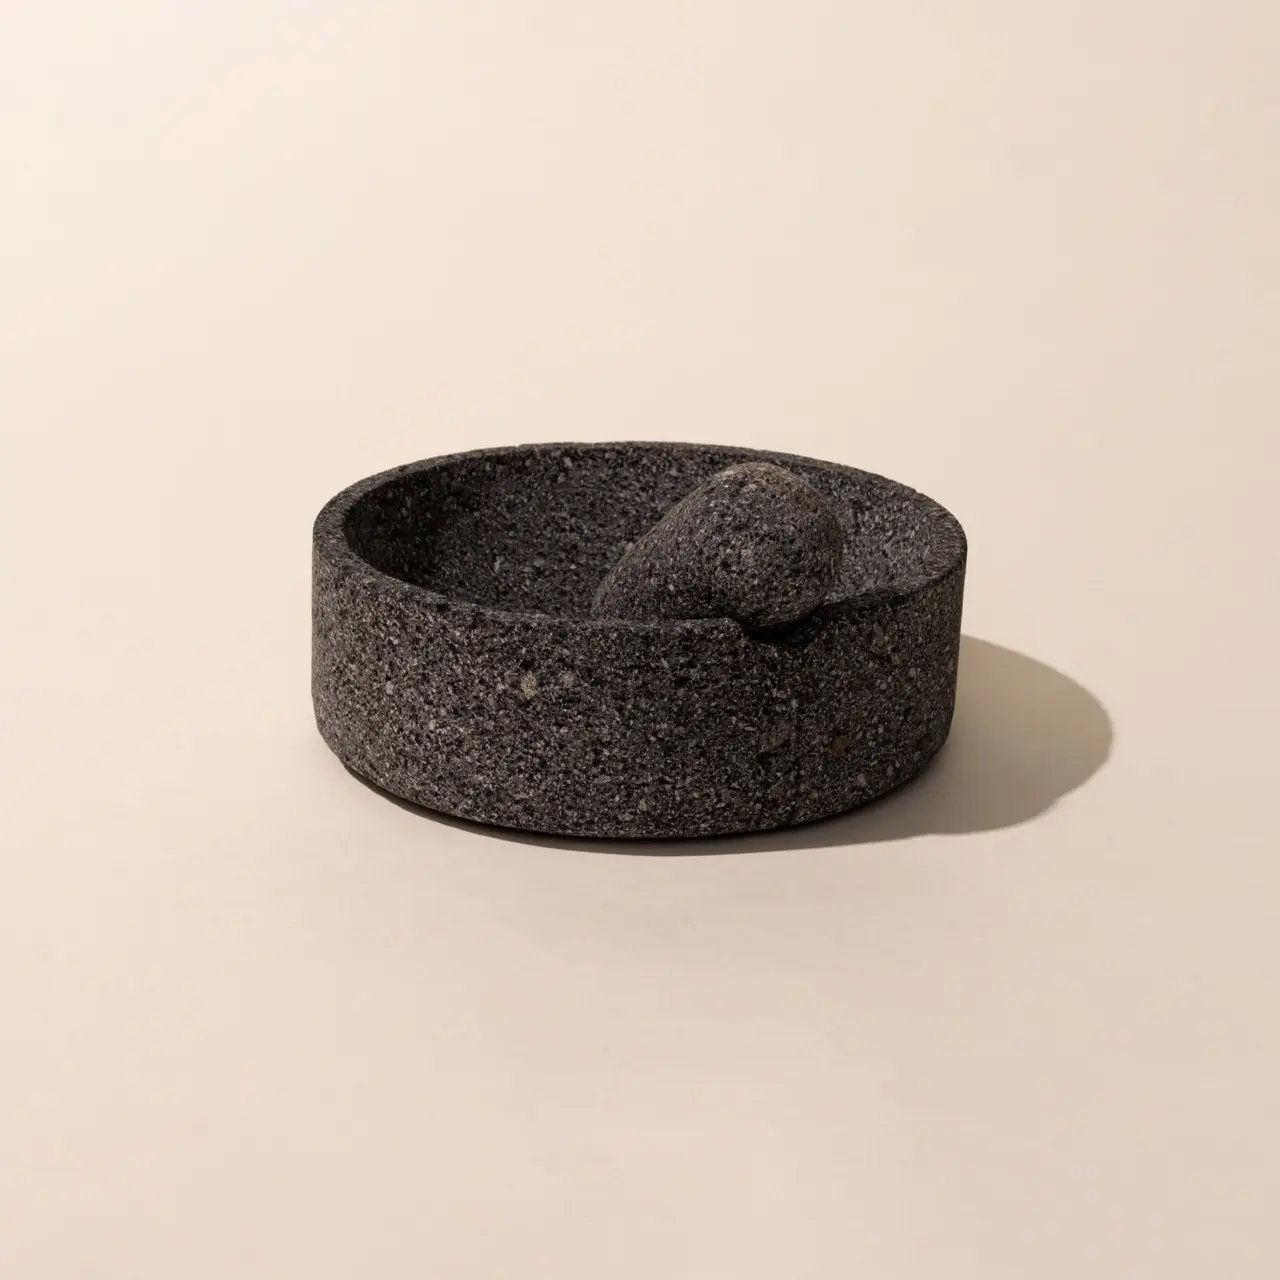 A stone molcajete, which is a traditional Mexican version of a mortar and pestle, on a neutral background.